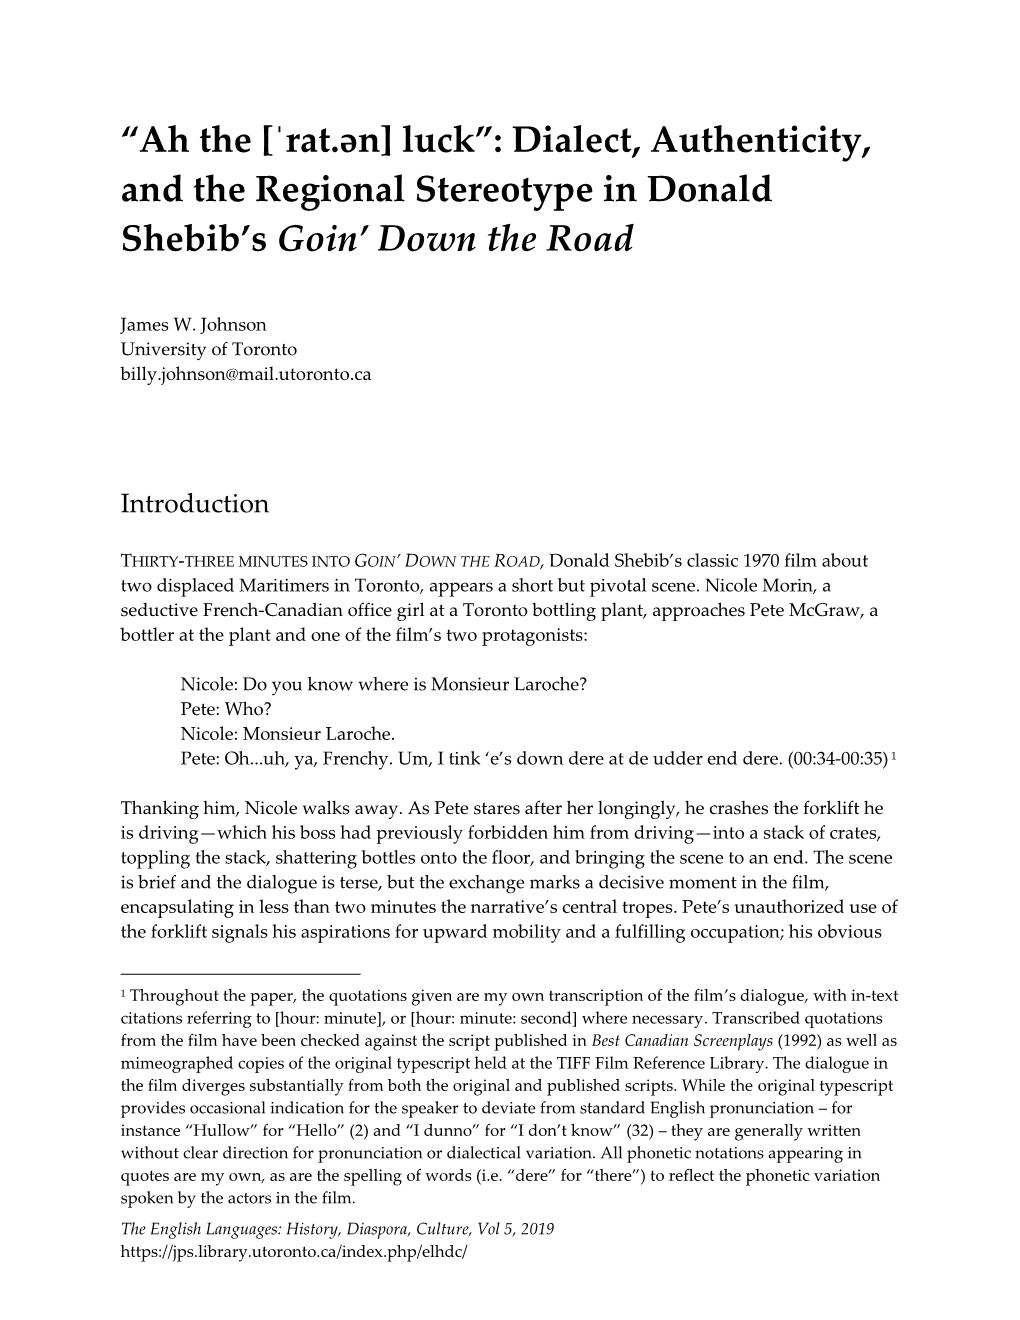 Dialect, Authenticity, and the Regional Stereotype in Donald Shebib's